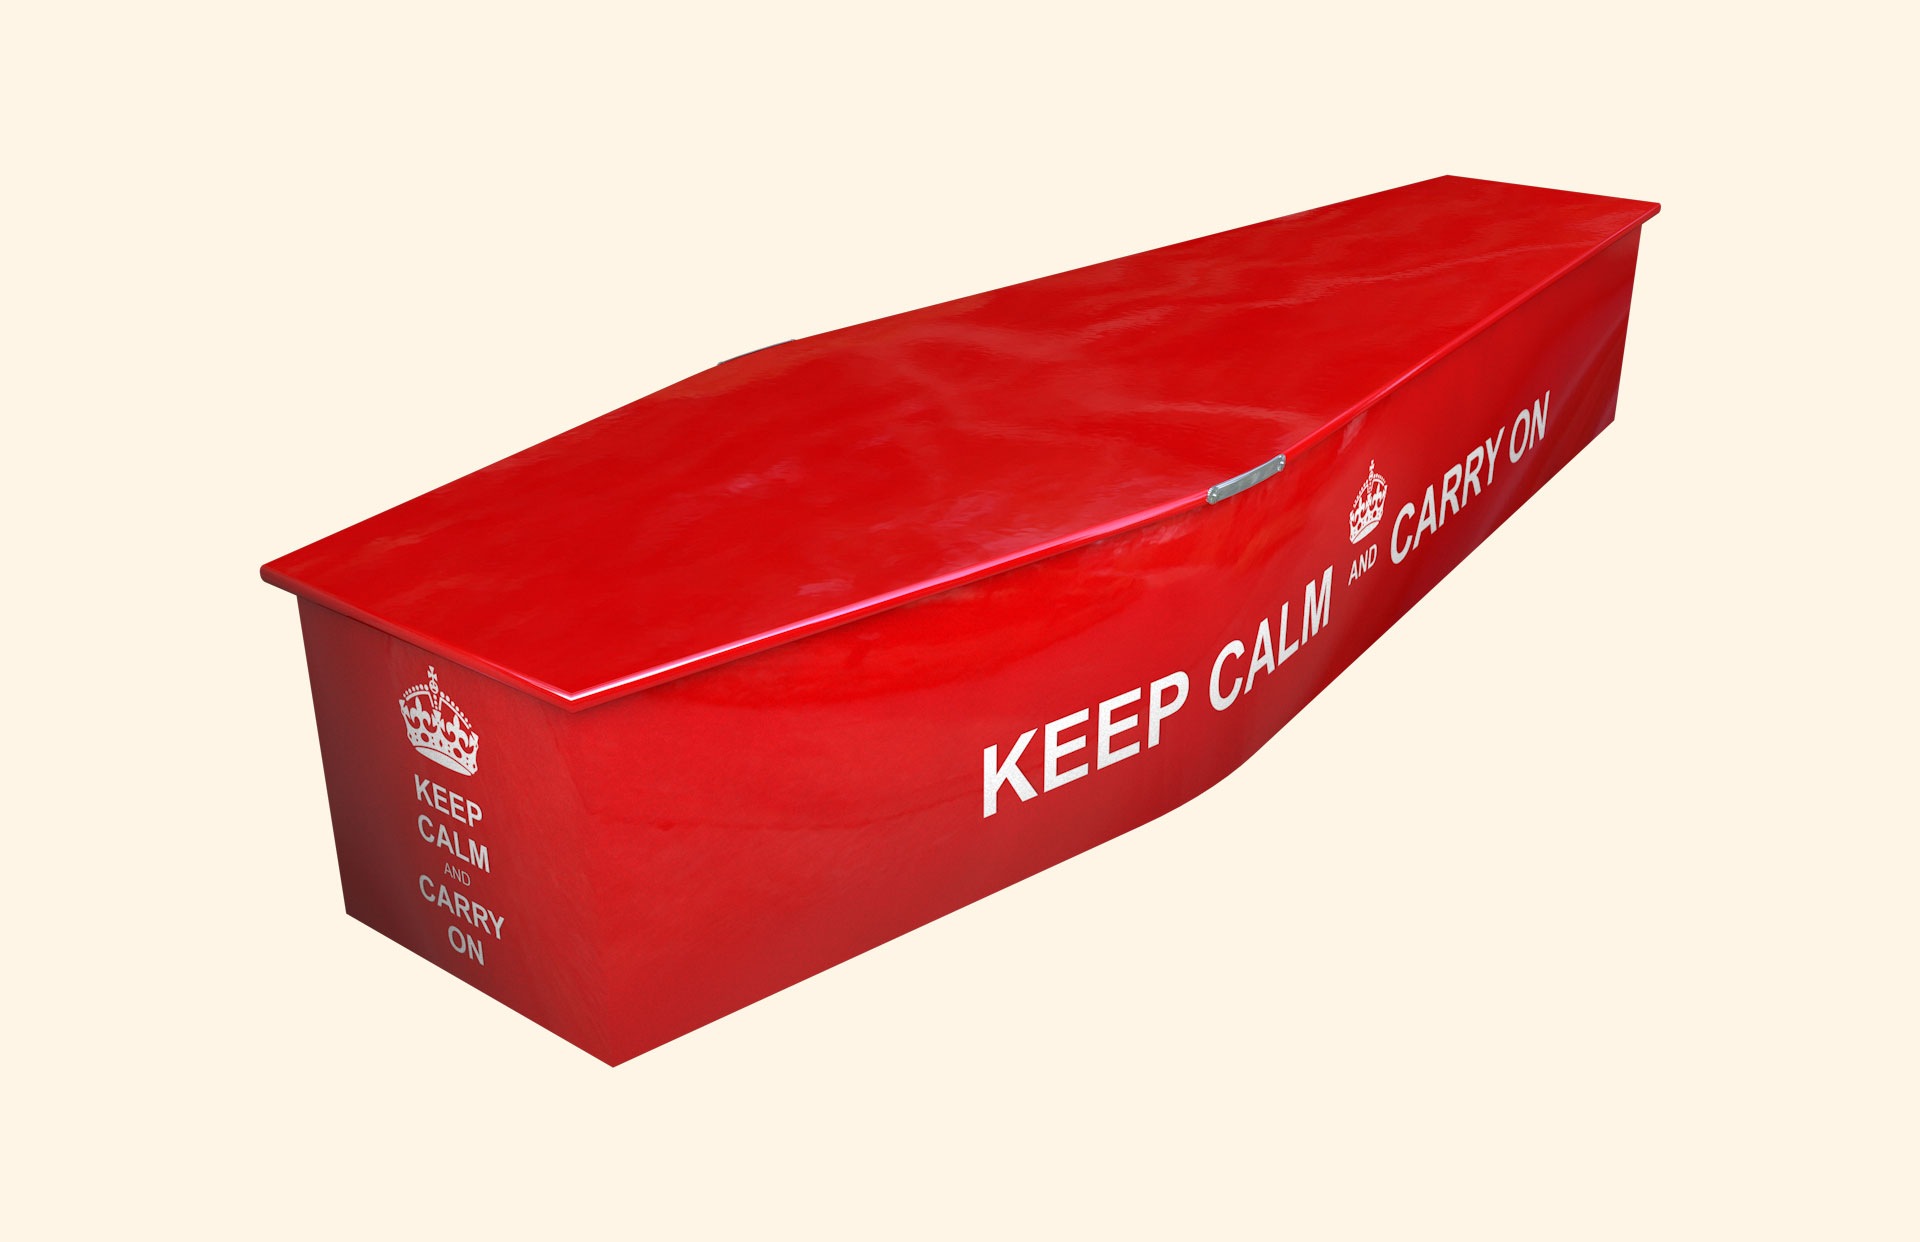 Keep Calm design on a traditional coffin